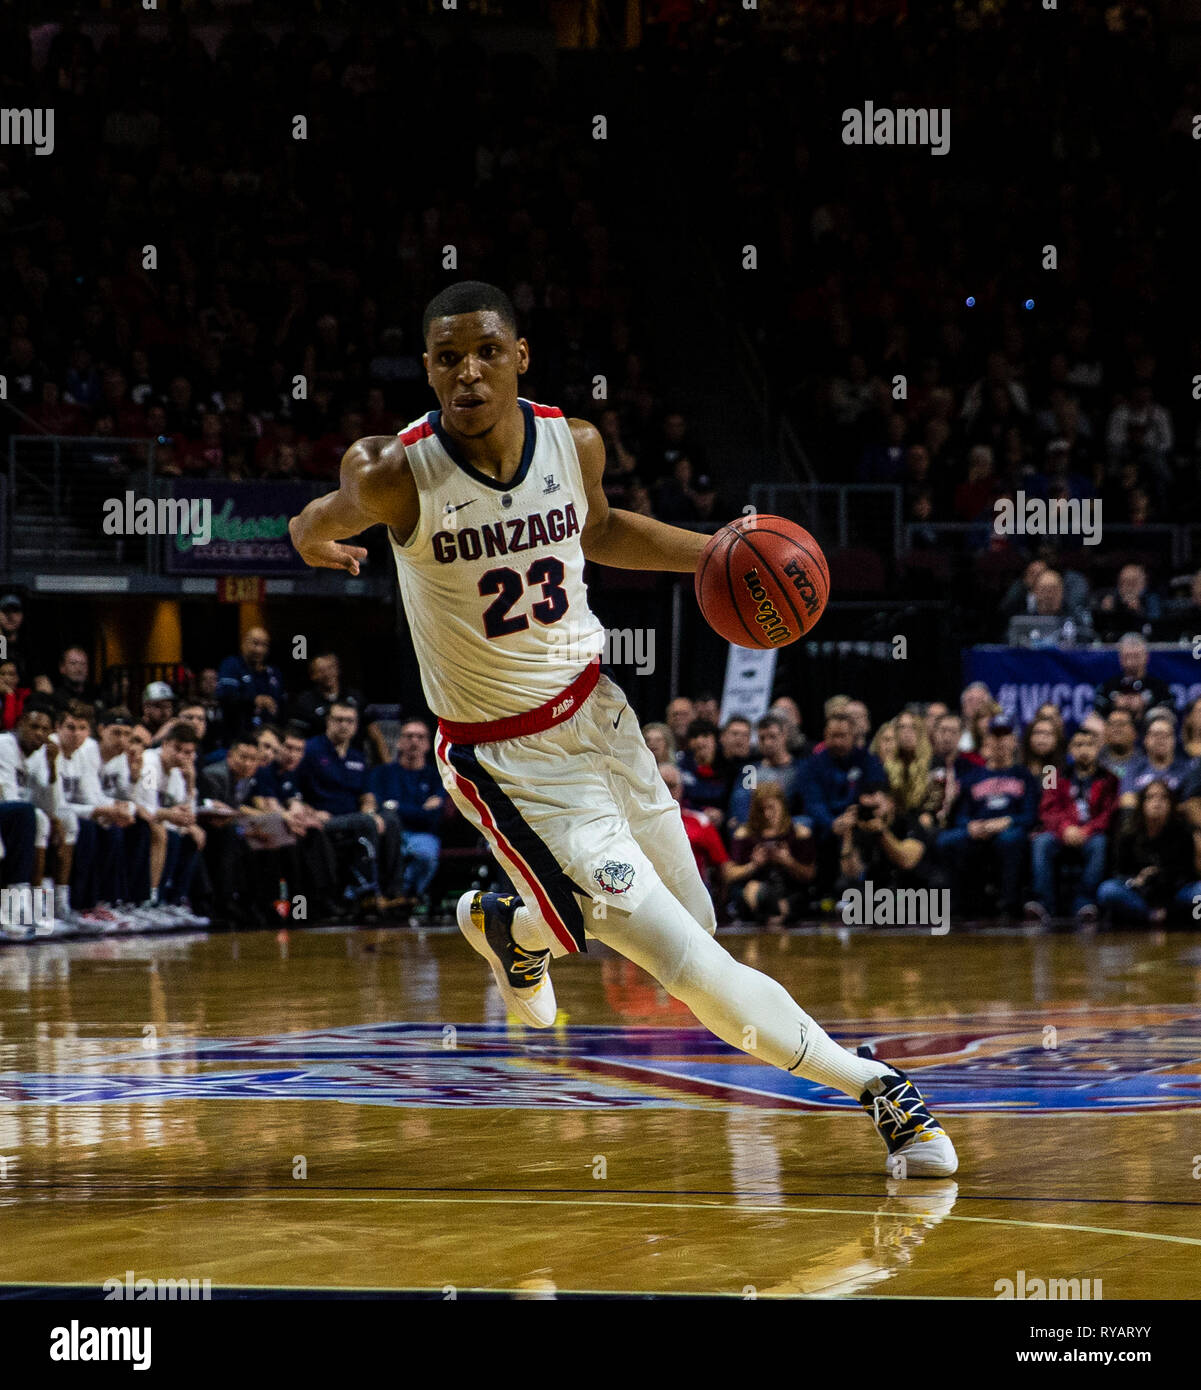 Mar 12 2019 Las Vegas, NV, U.S.A. Gonzaga guard Zach Norvell Jr. (23)drives to the basket during the NCAA West Coast Conference Men's Basketball Tournament championship between the Gonzaga Bulldogs and the Saint Mary's Gaels 47-60 lost at Orleans Arena Las Vegas, NV. Thurman James/CSM Stock Photo